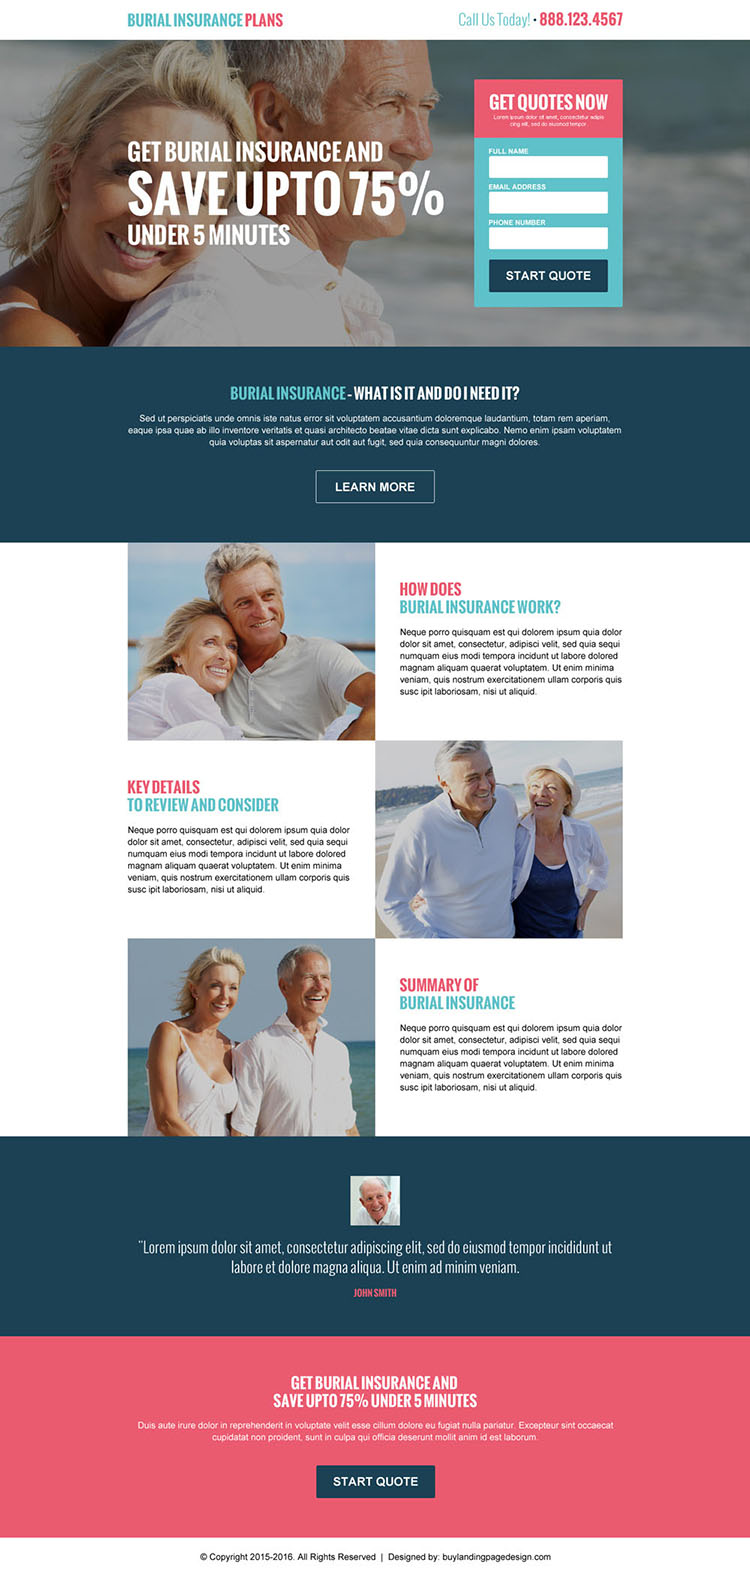 converting burial insurance plans responsive landing page design